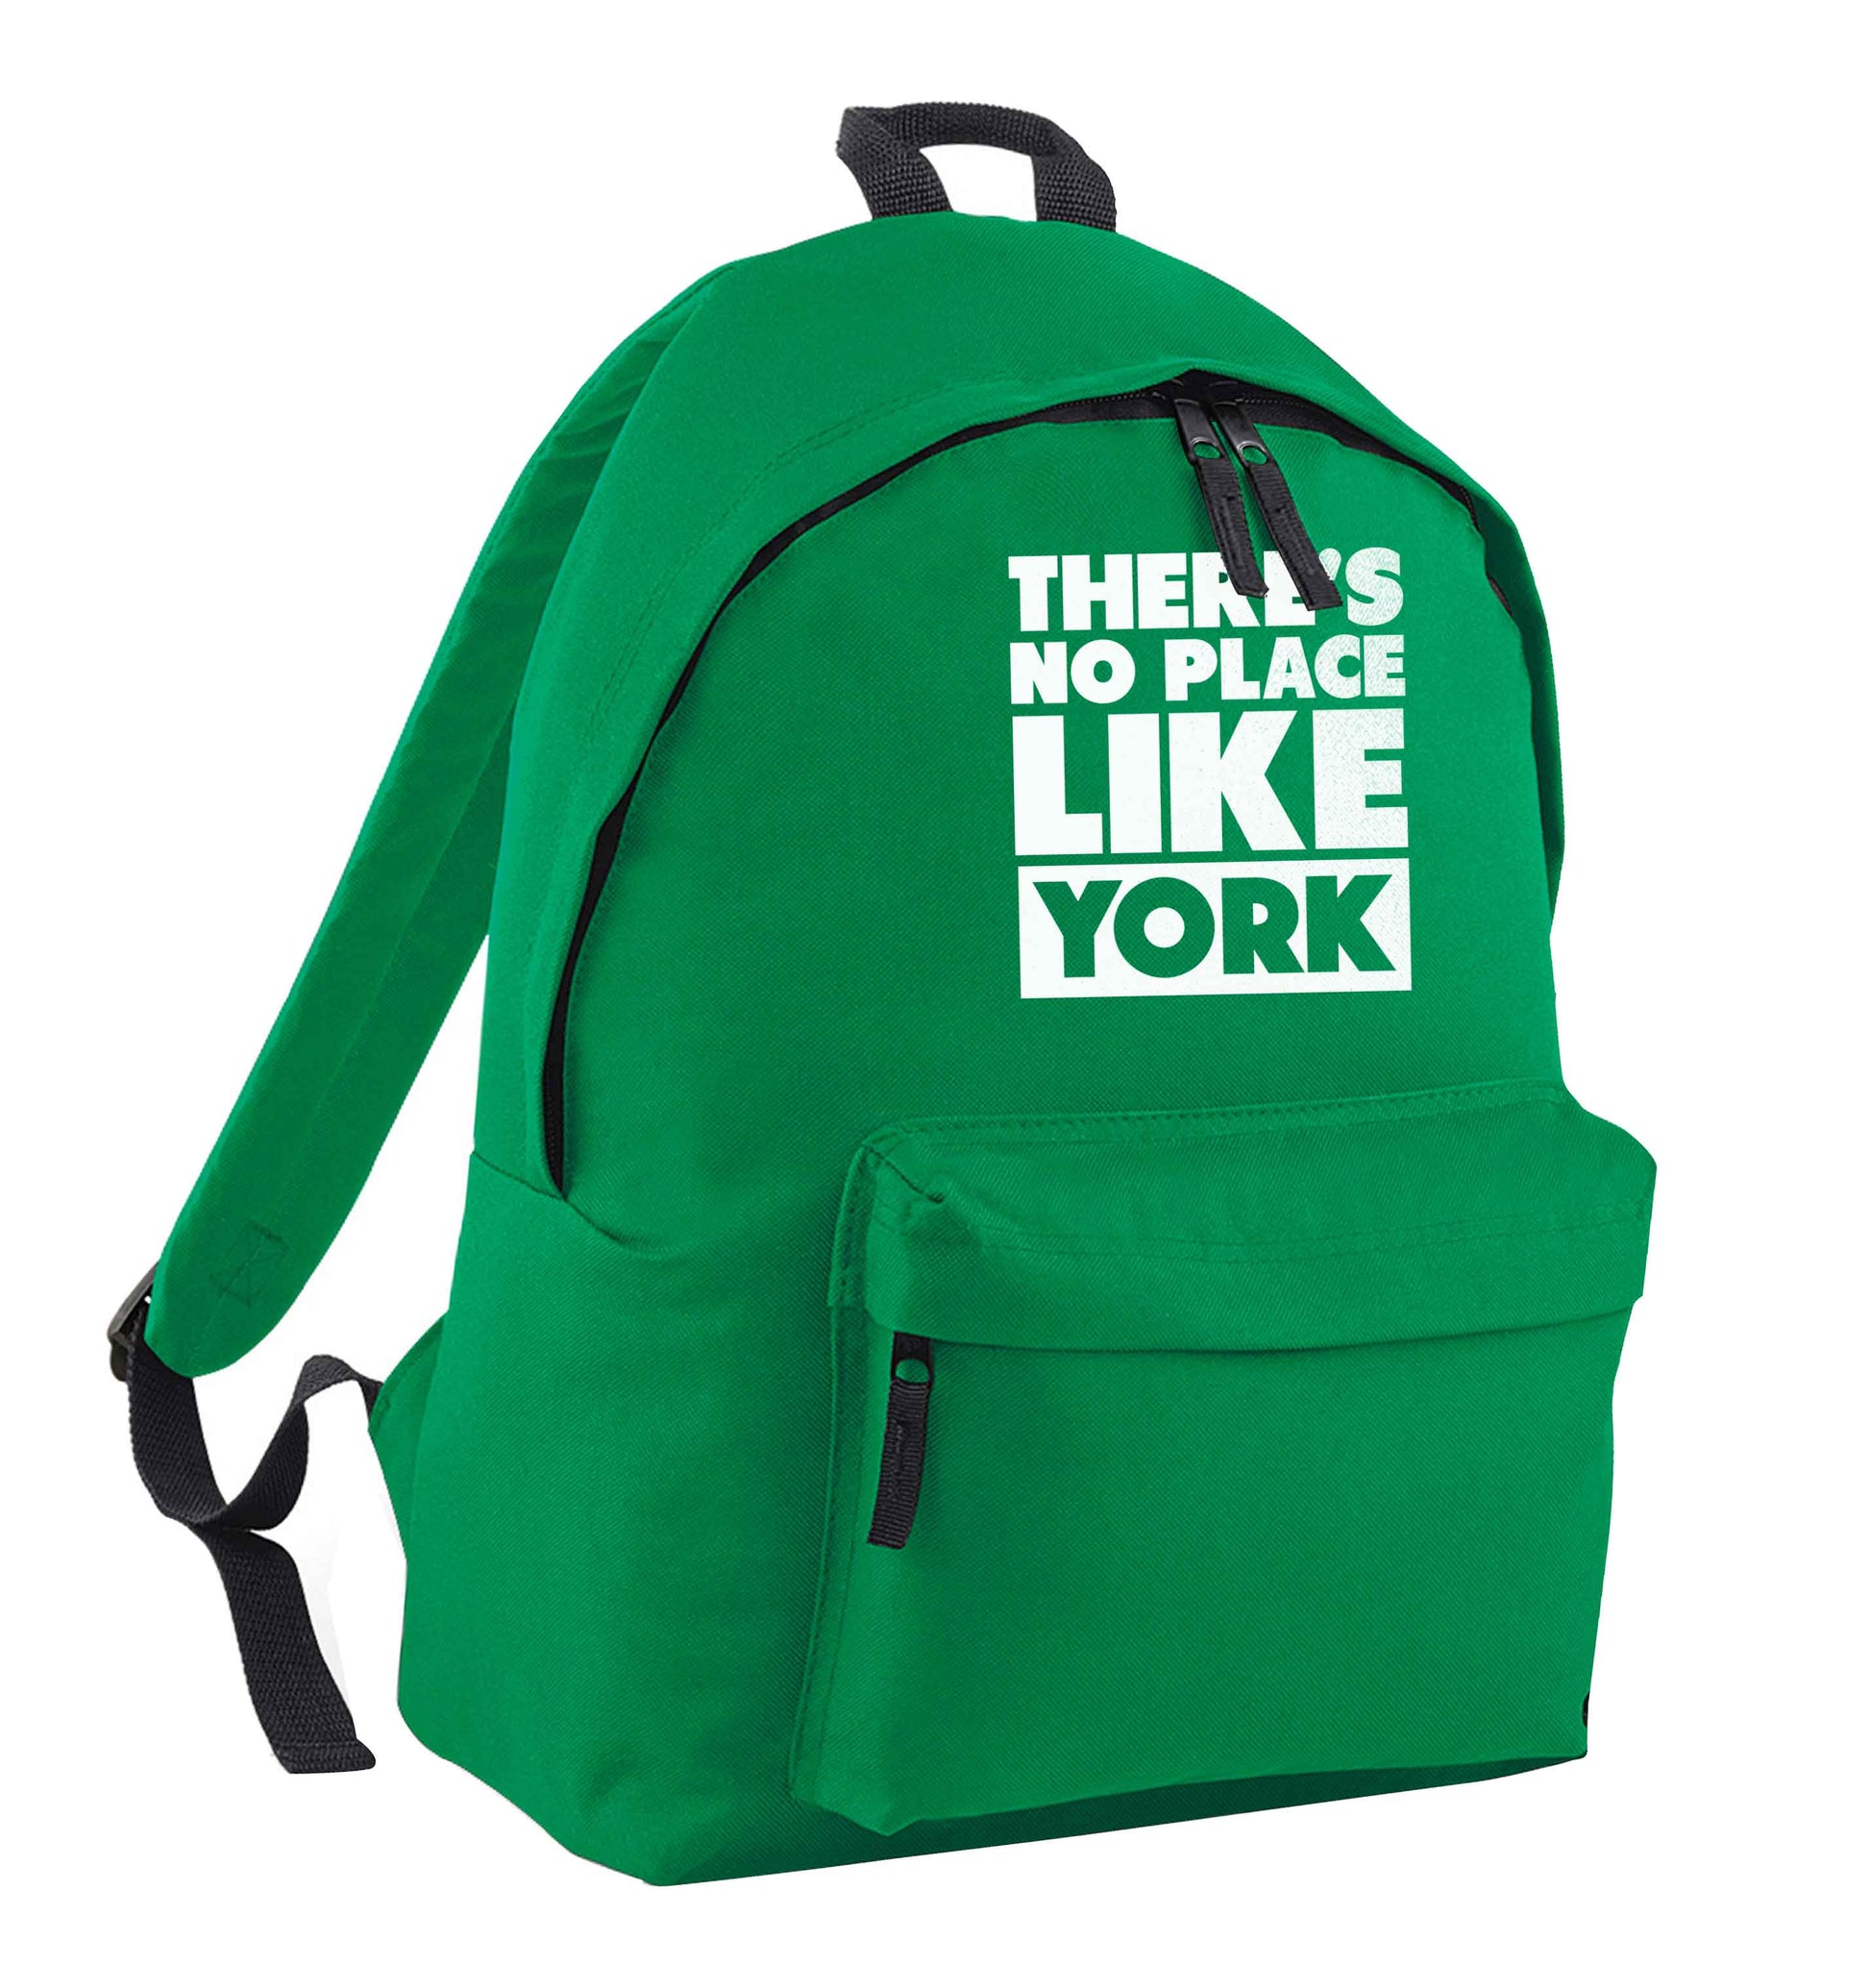 There's no place like york green adults backpack